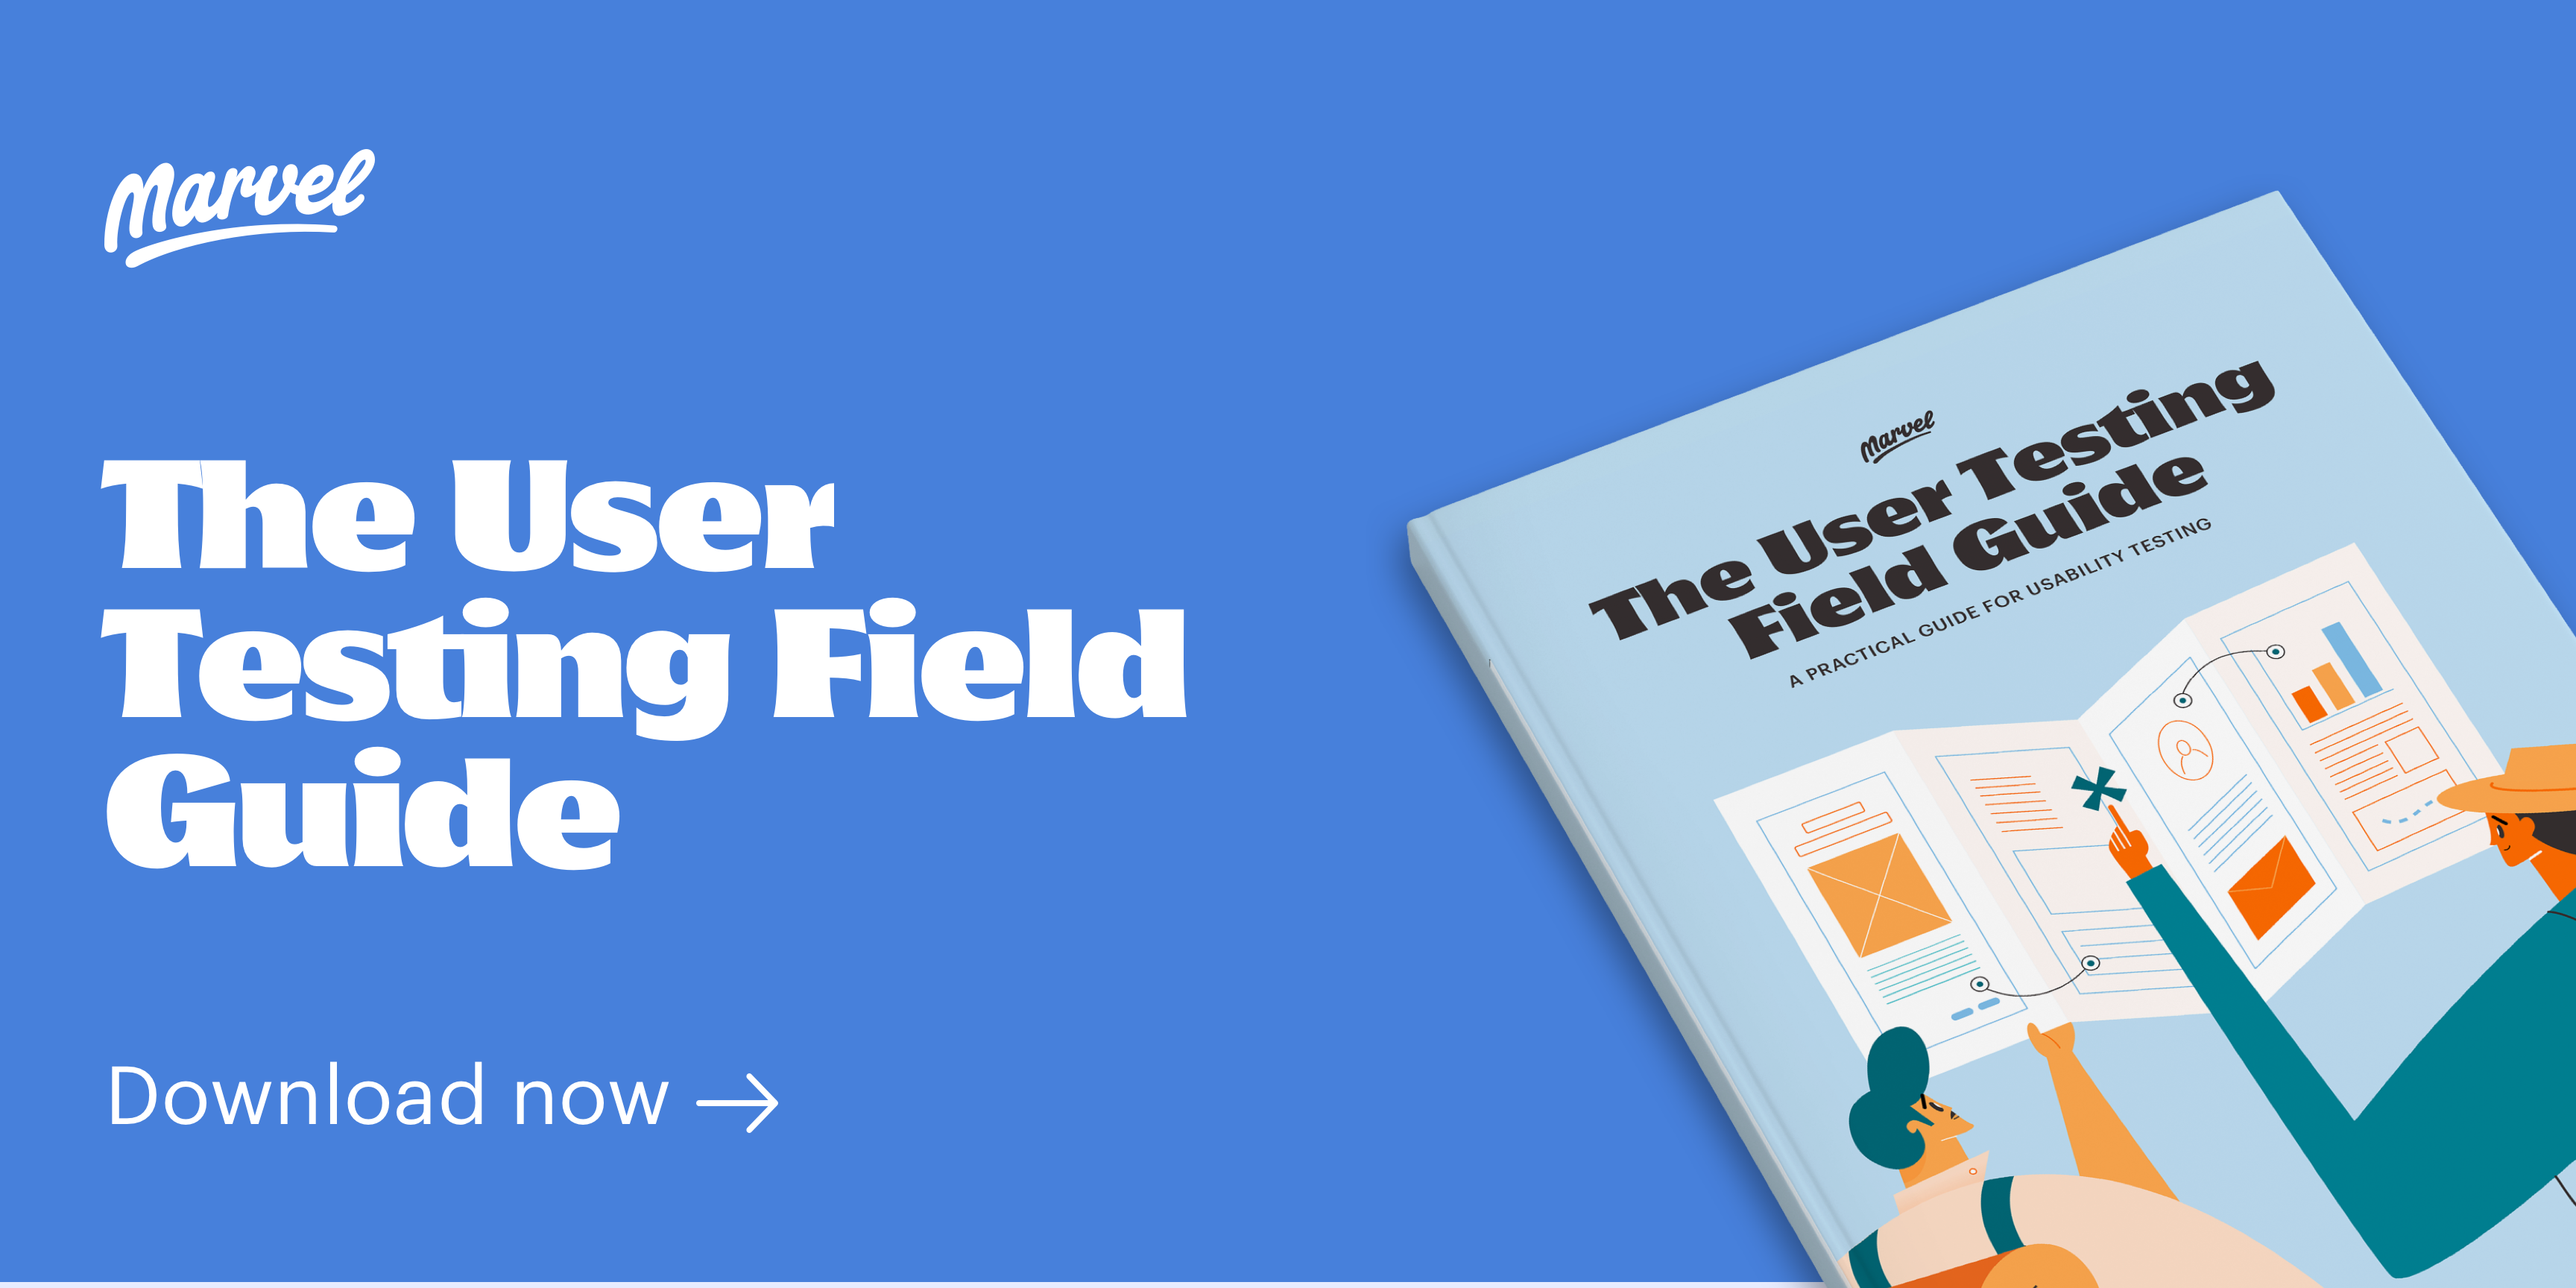 The User testing field guide